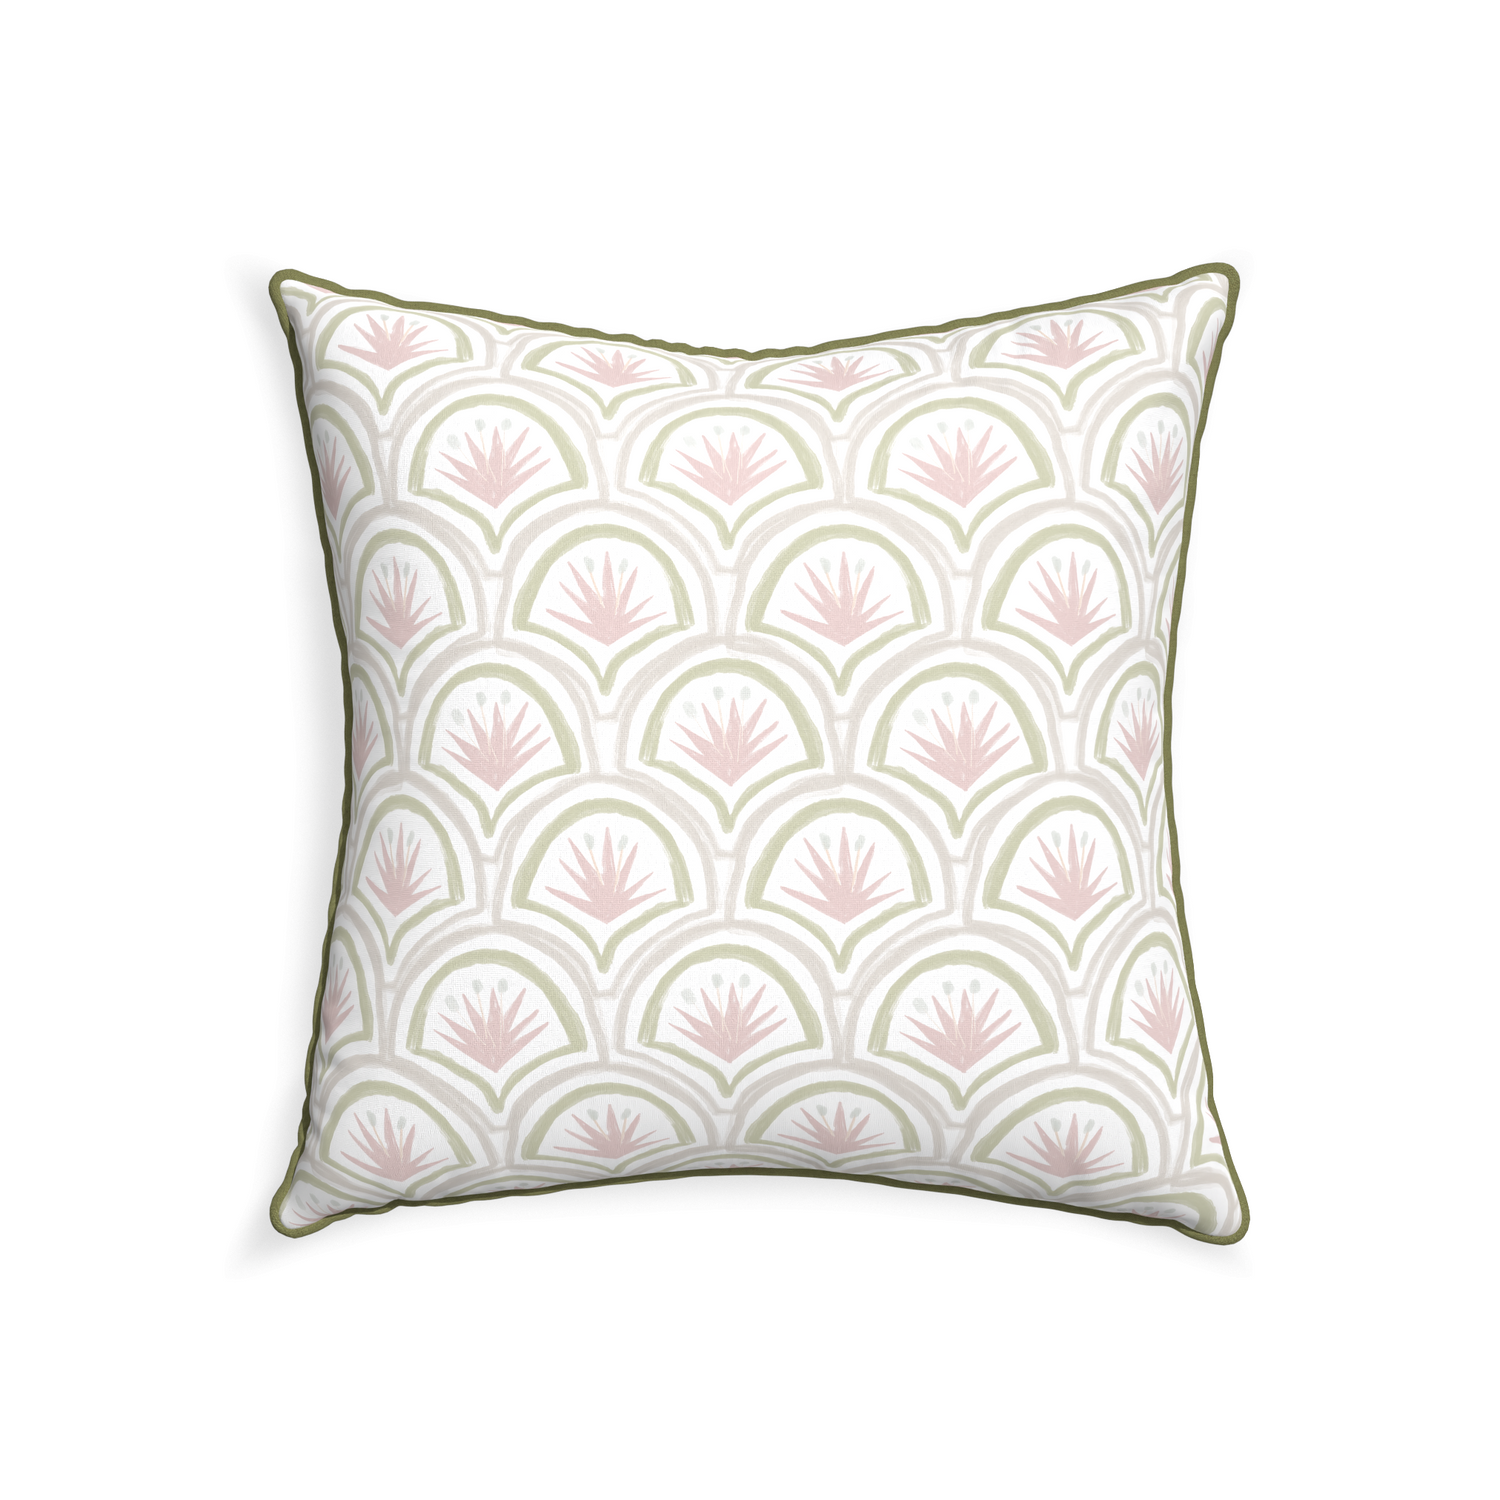 22-square thatcher rose custom pillow with moss piping on white background